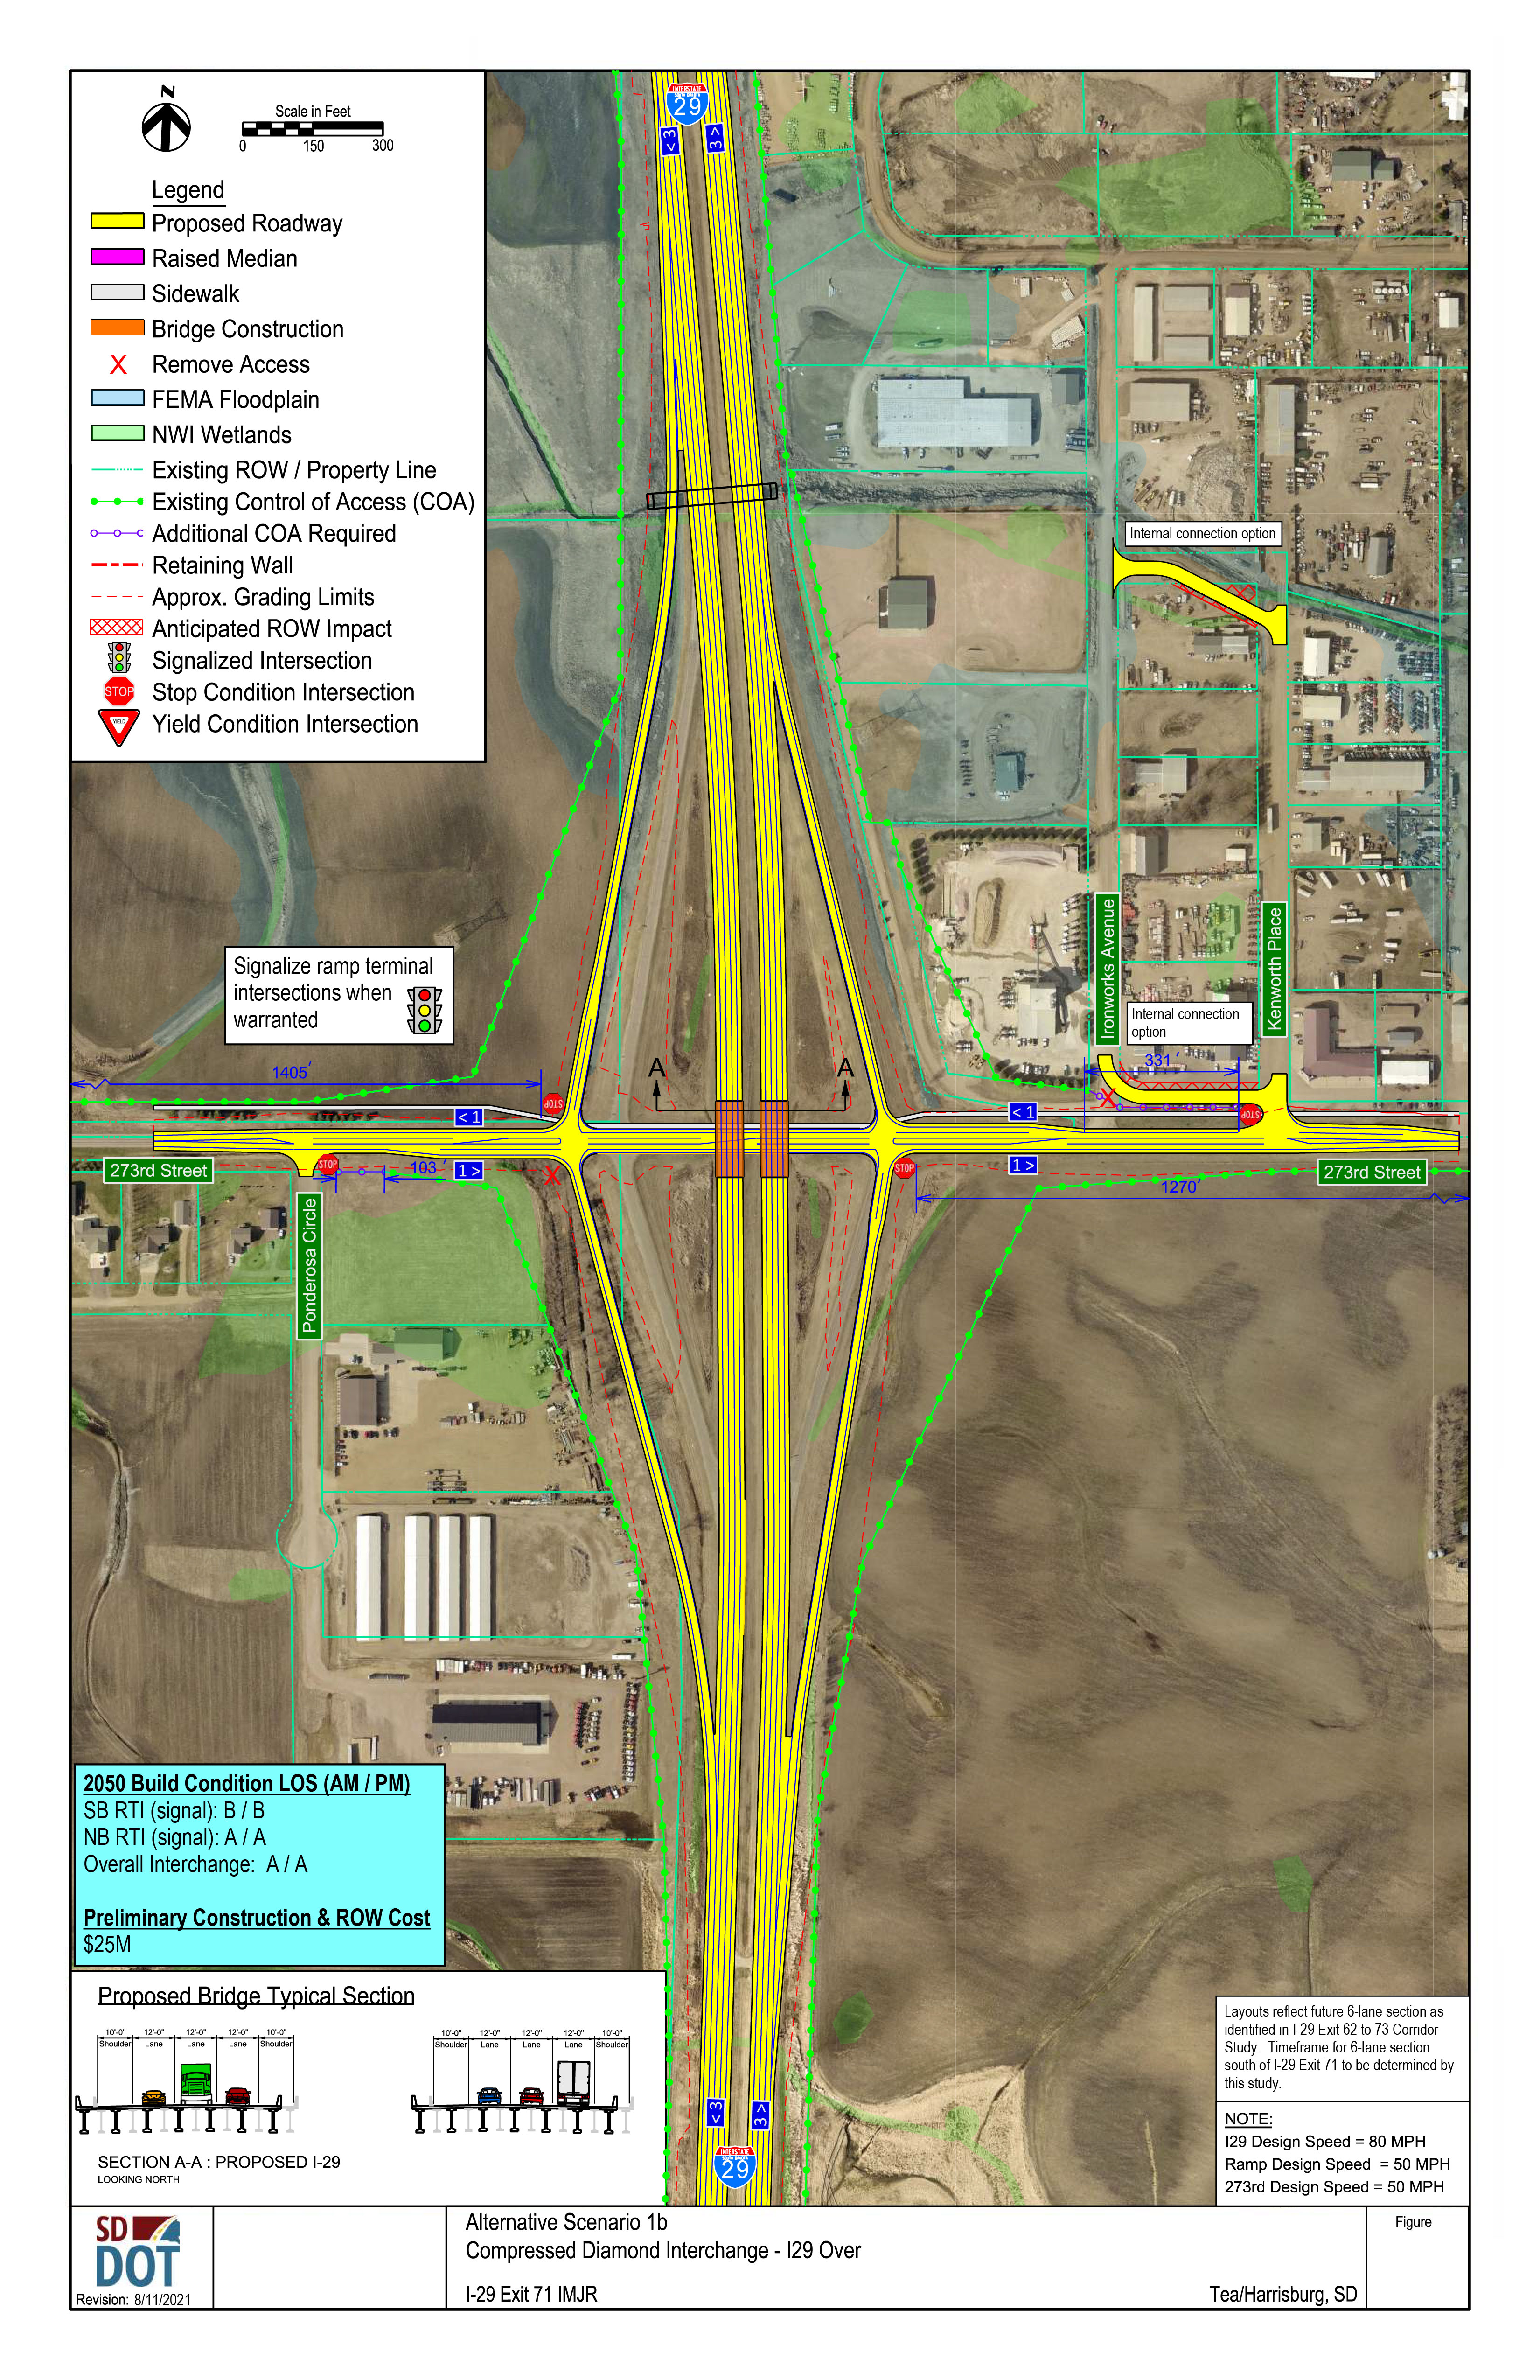 This image shows the conceptual layout of a Compressed Diamond Interchange, and what the road over it would look like. Details on the diagram include proposed roadway, raised median, sidewalk, bridge construction, access control, FEMA floodplain, NWI wetlands, existing Right of Ways and property lines, existing control of access points, additional control of access points needed, retaining walls, grading limits, anticipated right of way impacts, signalized intersections, stop condition intersections and yield condition intersections.